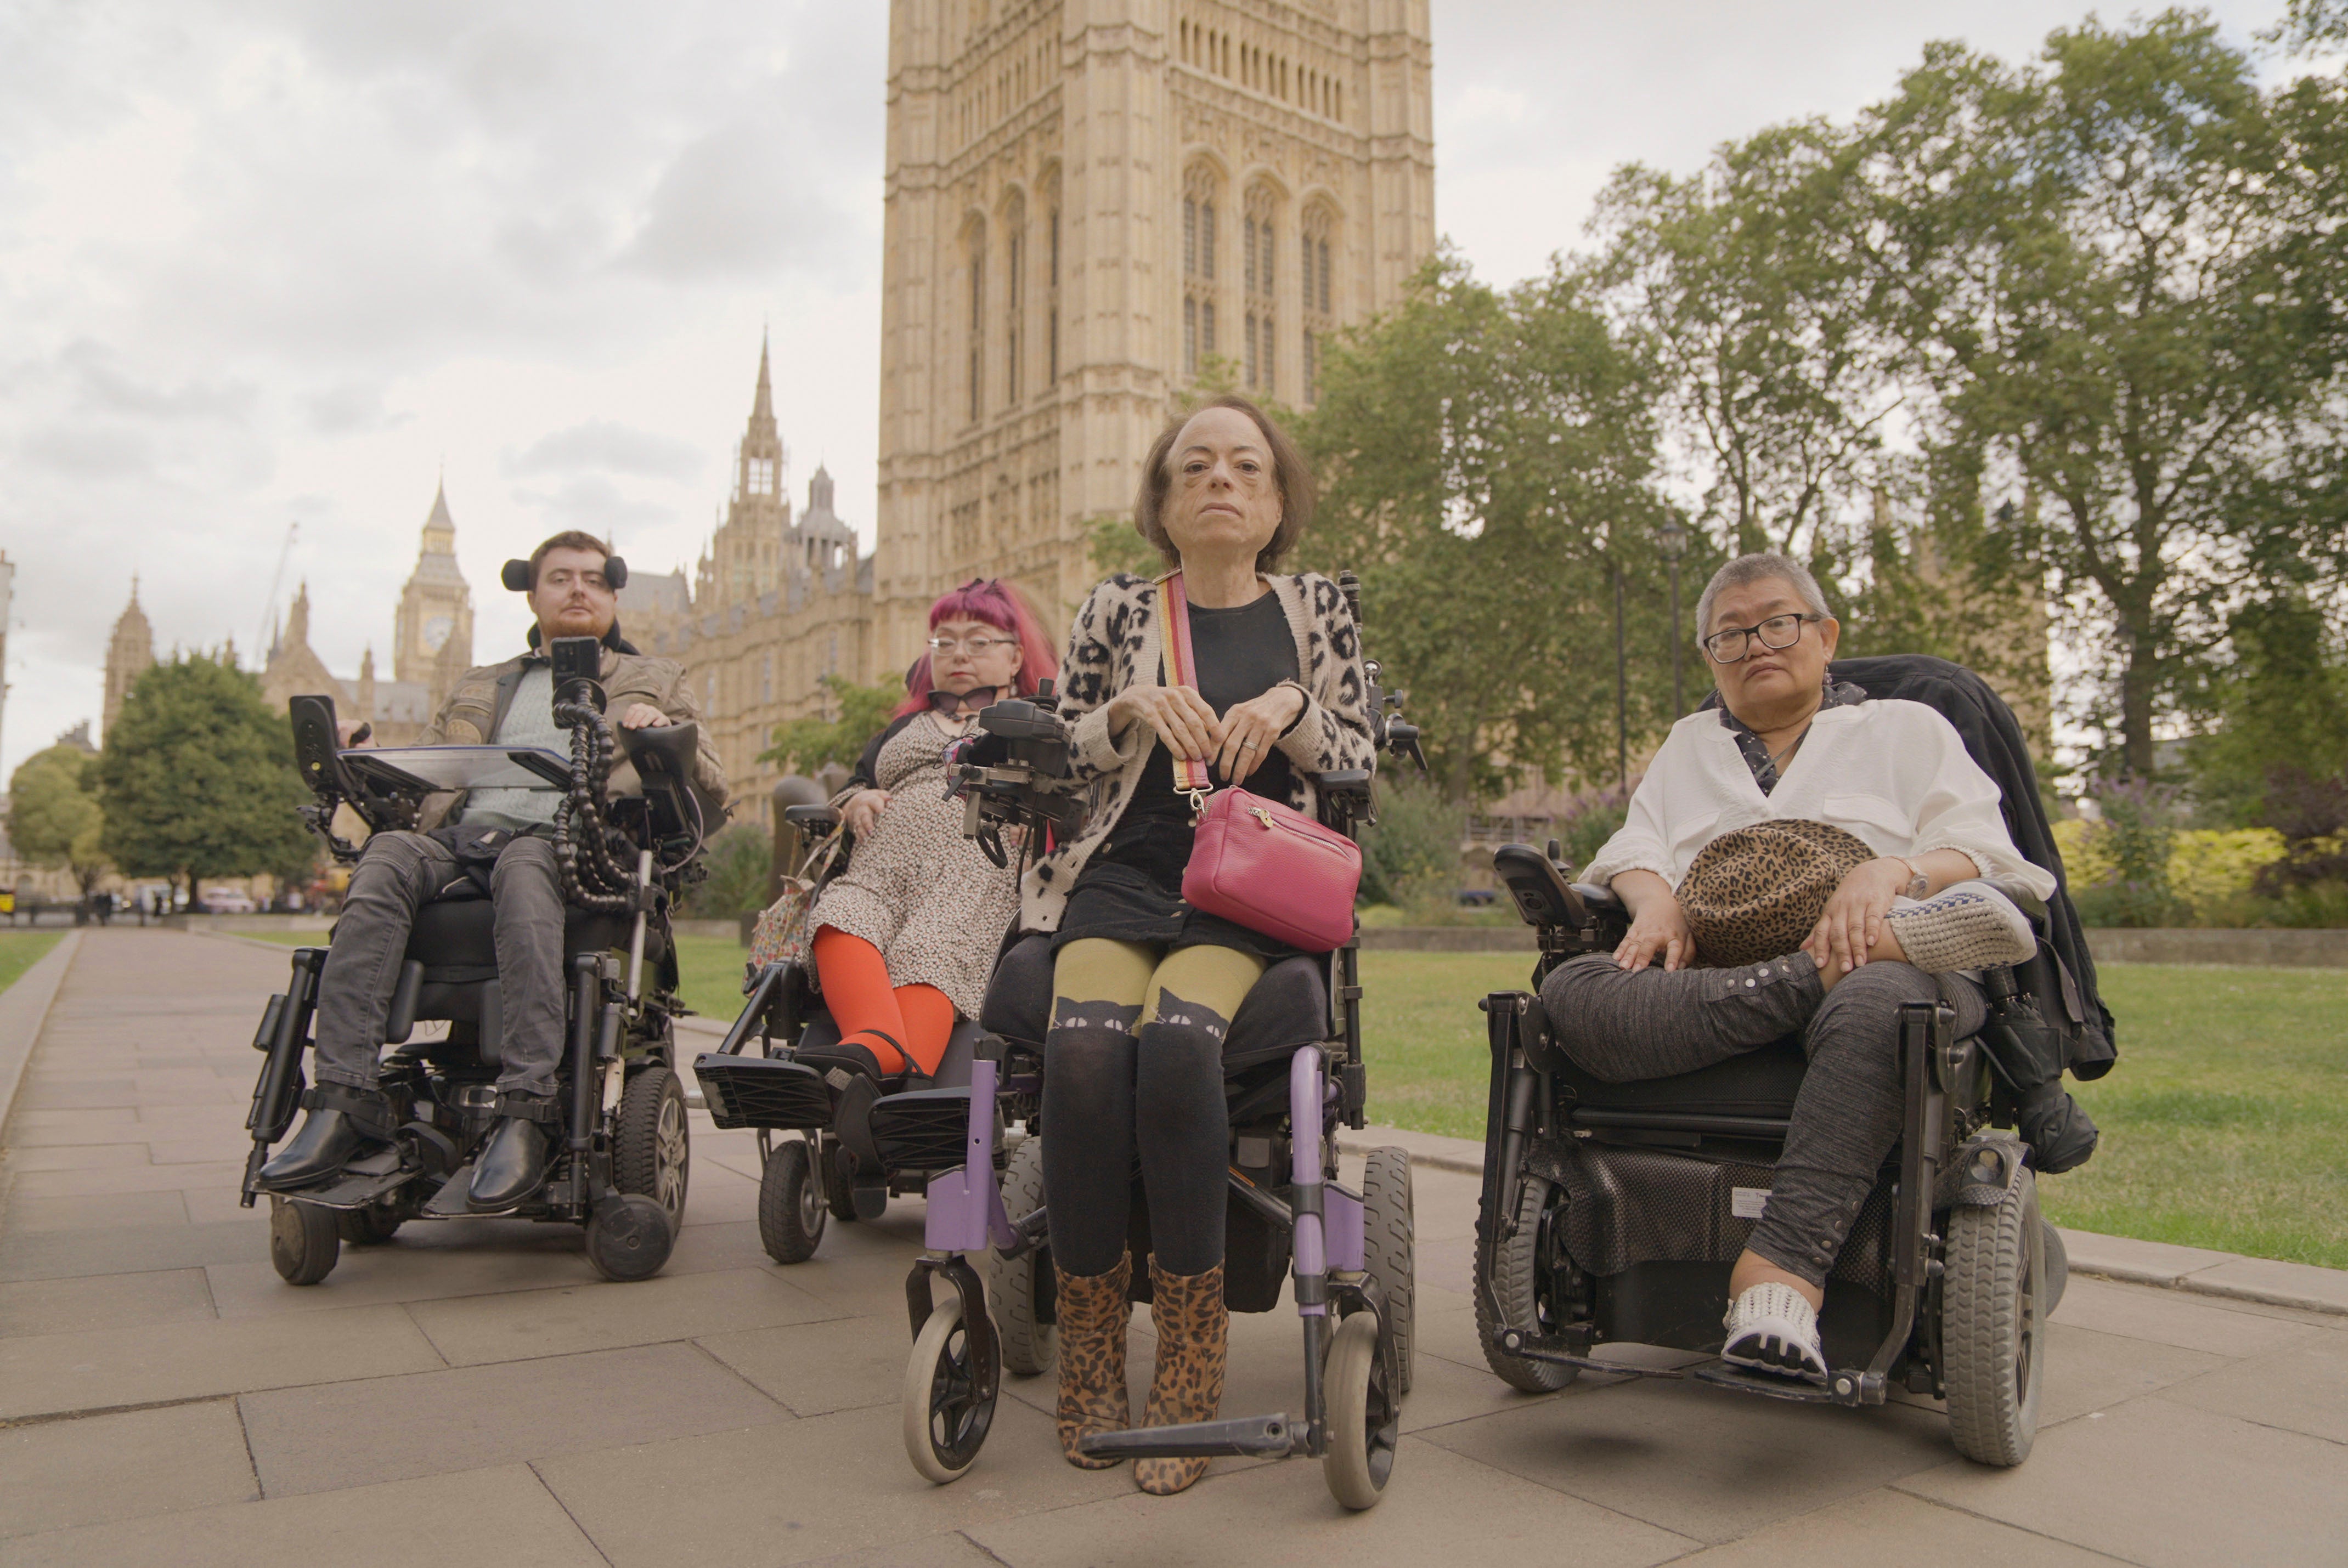 Liz Carr (front) in the BBC documentary ‘Better Off Dead?’